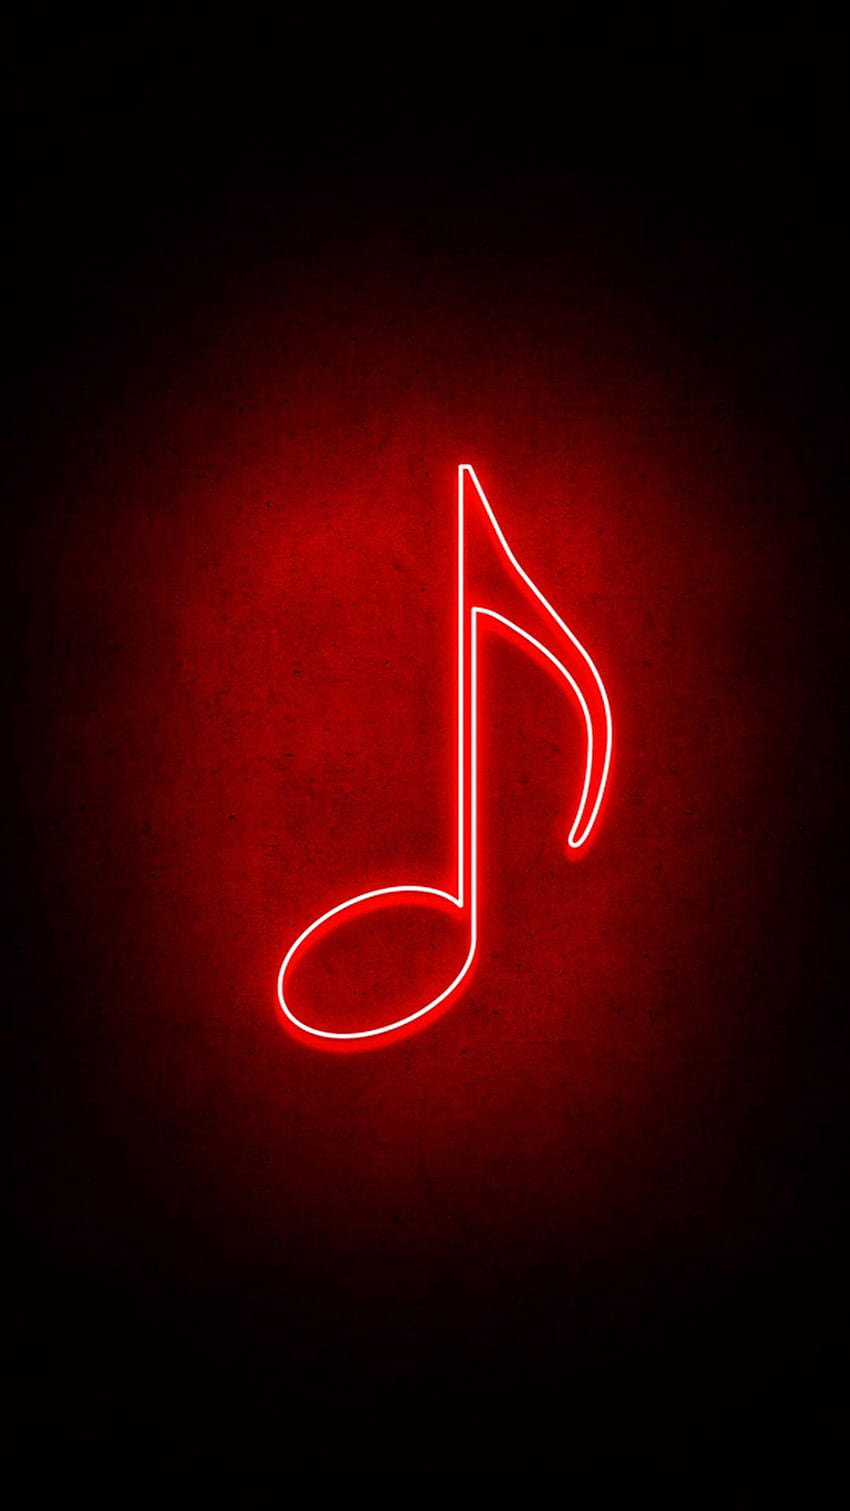 Music Live for Android, Neon Music HD phone wallpaper